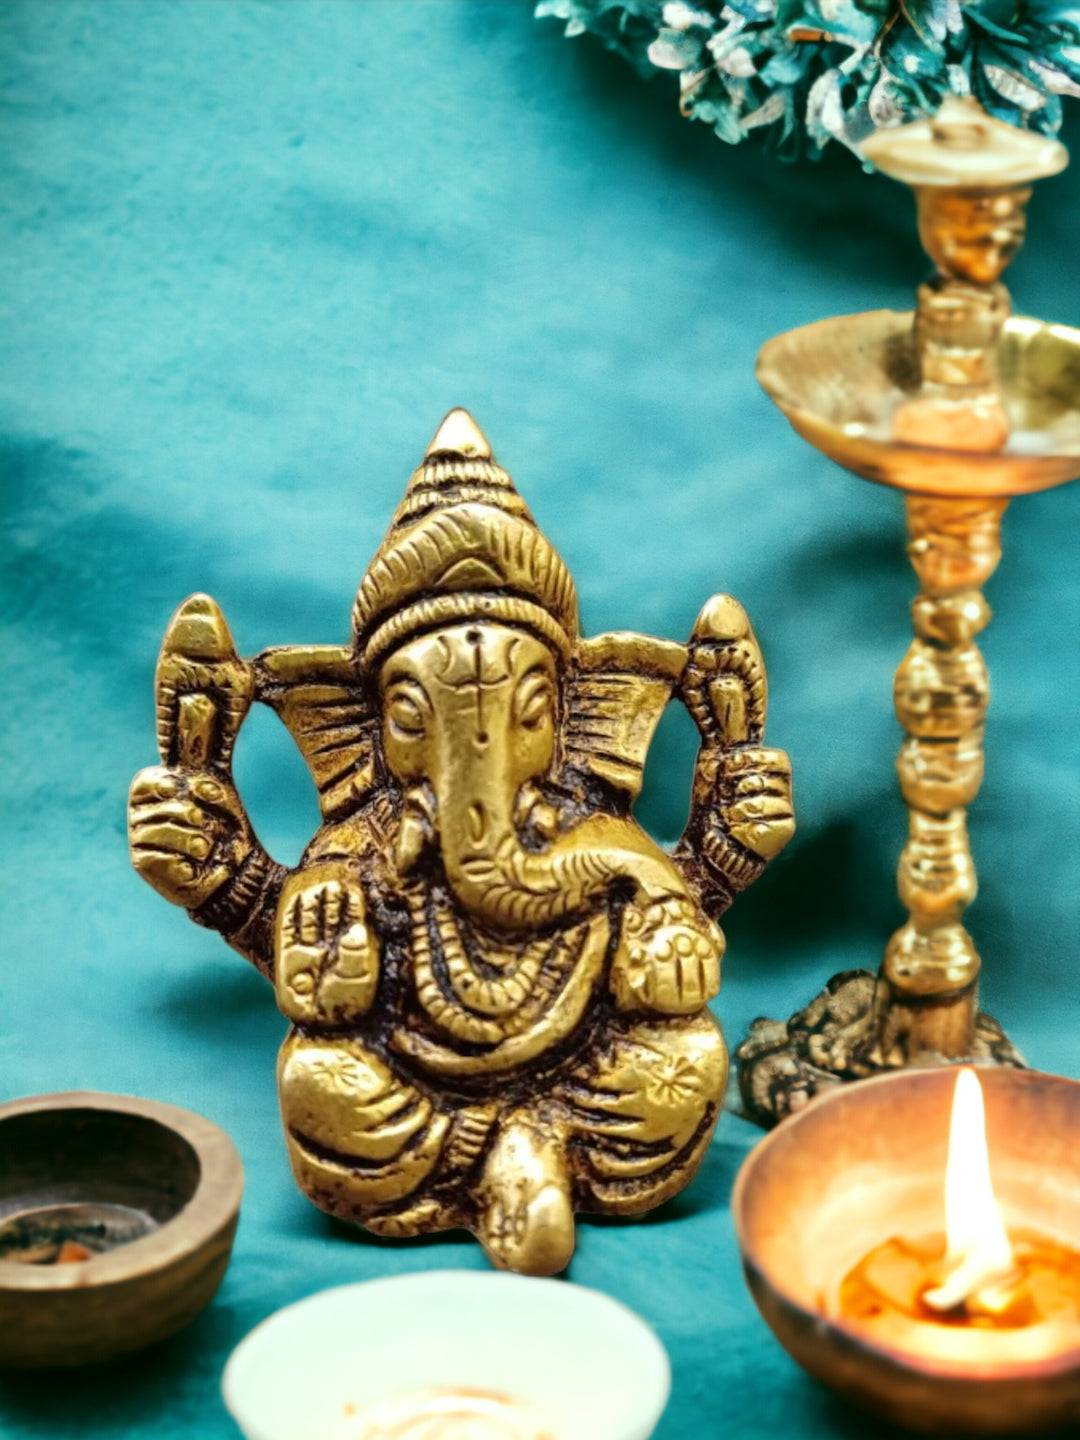 Tamas Lord Ganesha Statue/Idol for Home/Office/Study room (Golden) (1.6 Inches)